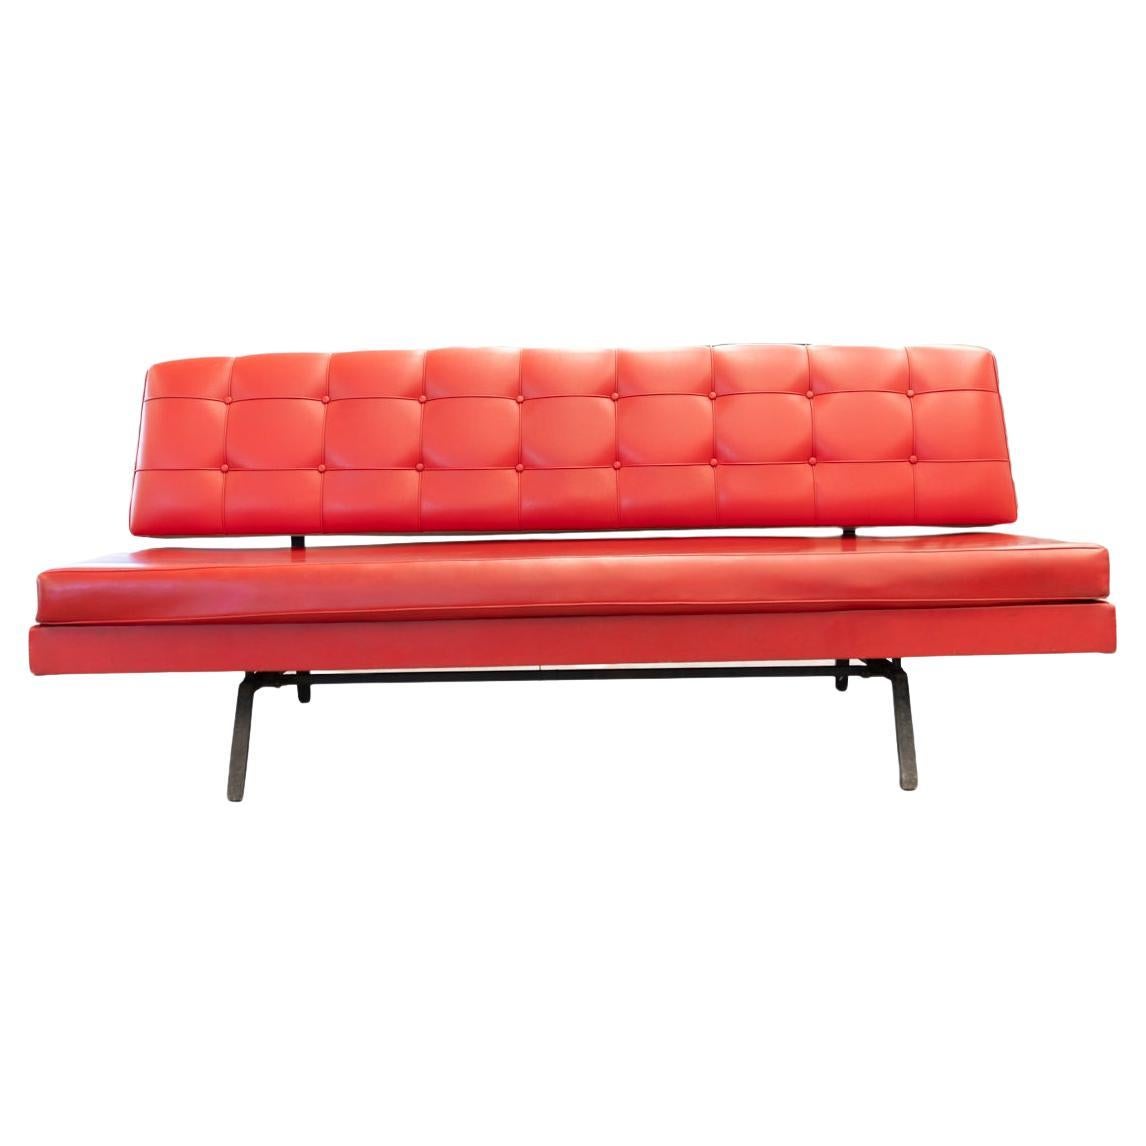 70s red sofa For Sale